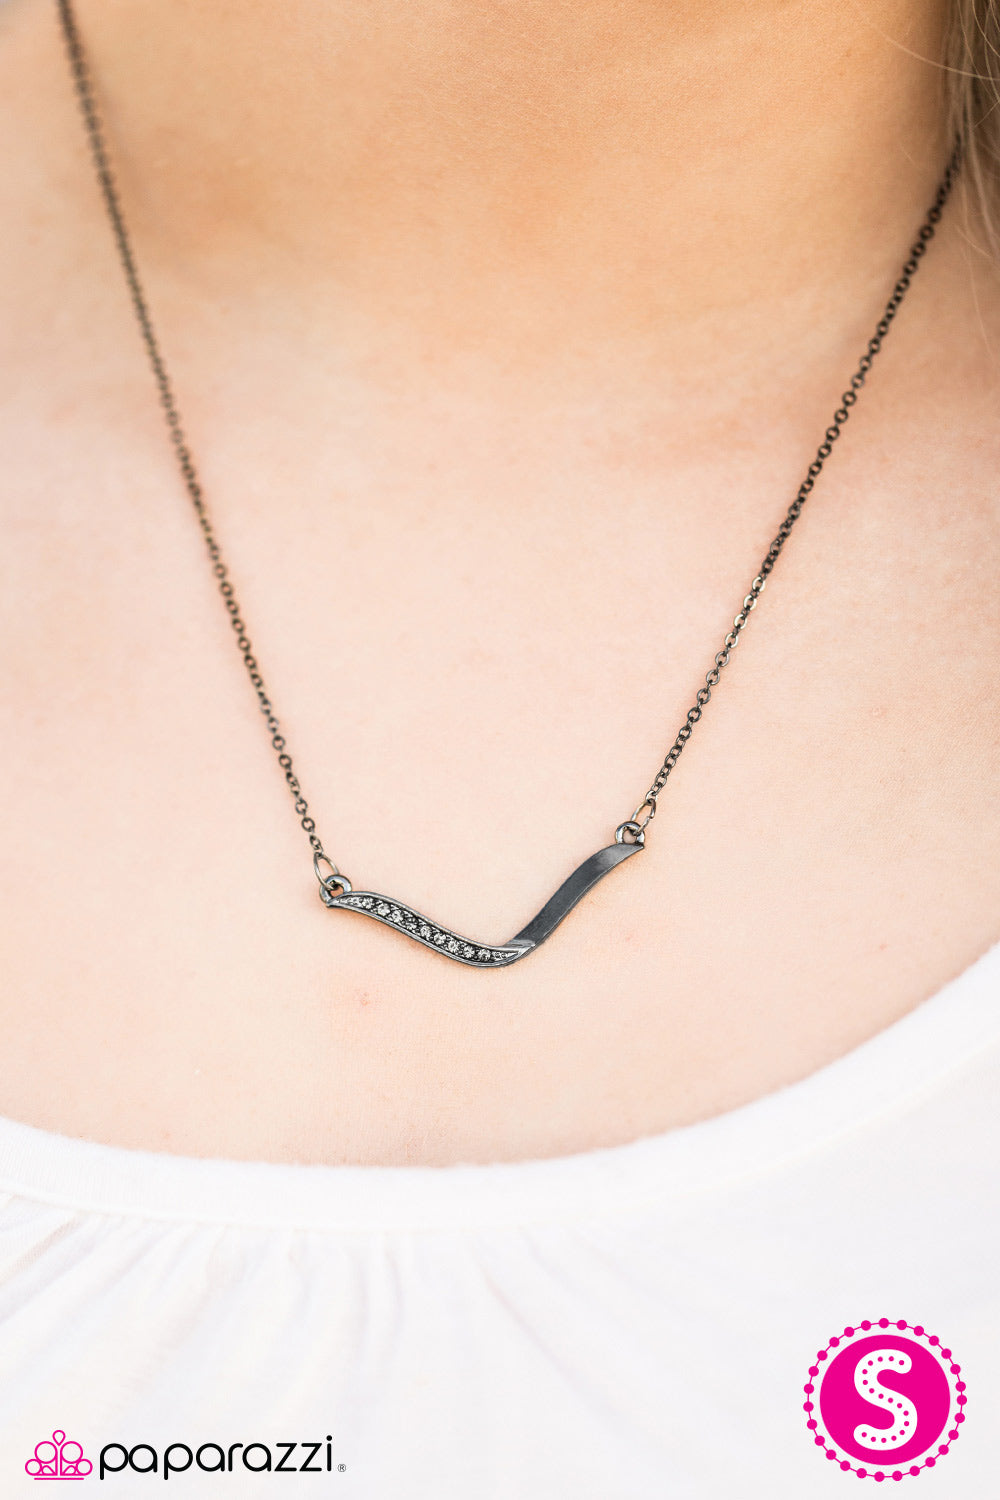 Find Your Wings - Black - Paparazzi necklace